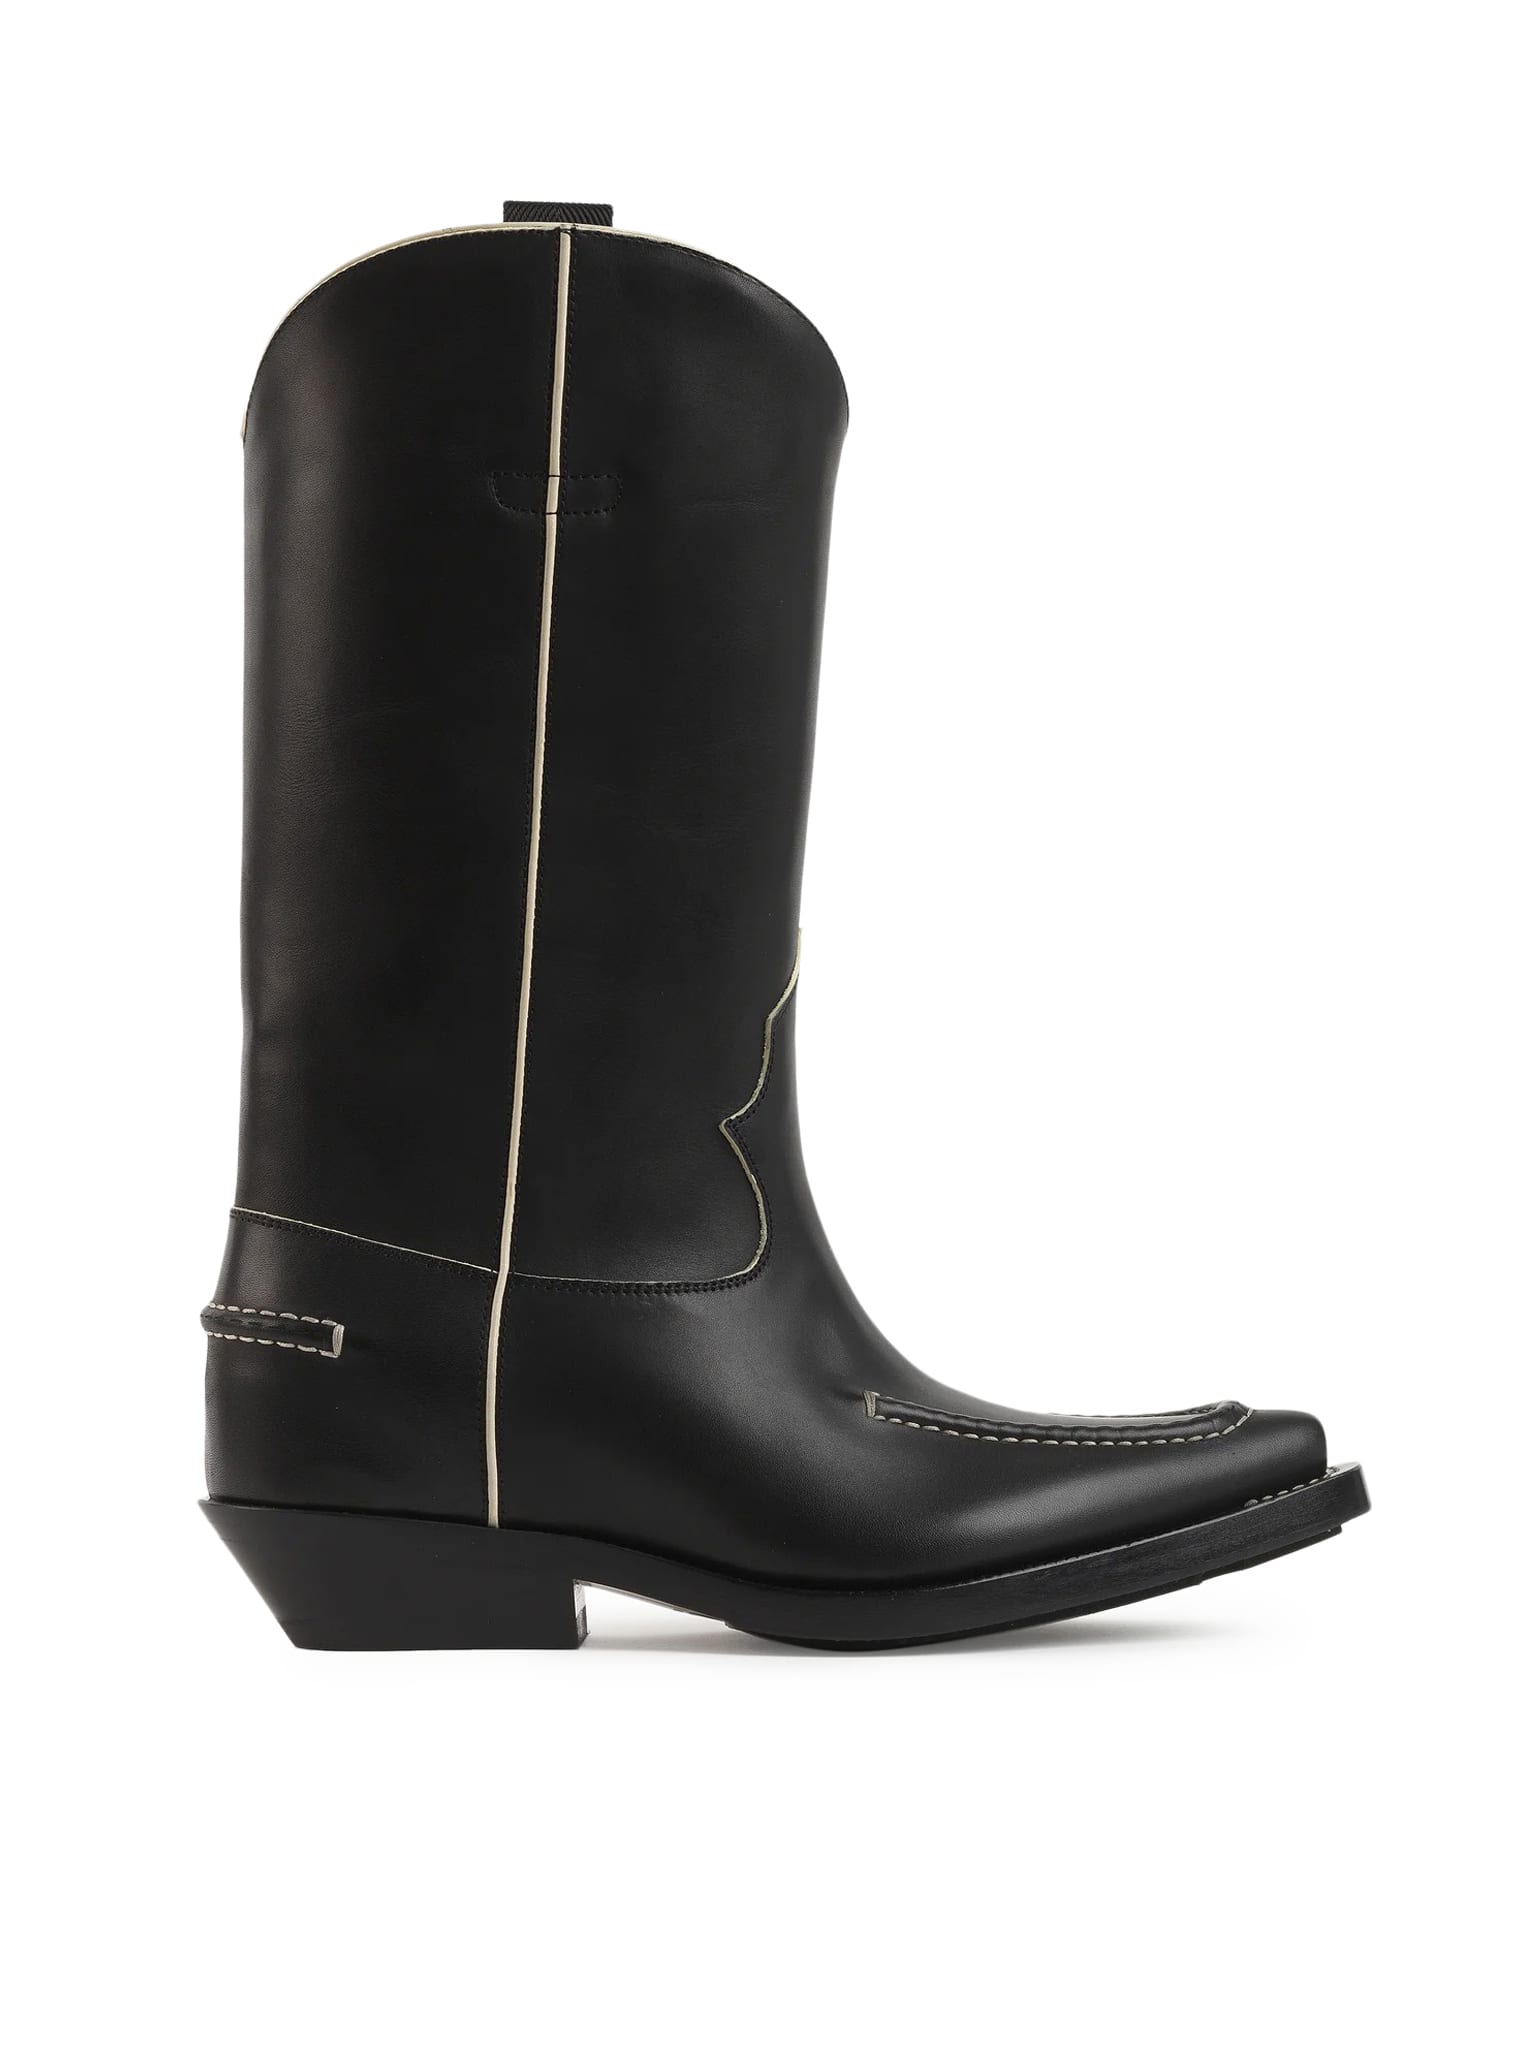 CHLOÉ NELLIE NATURAL EFFECT BOOT